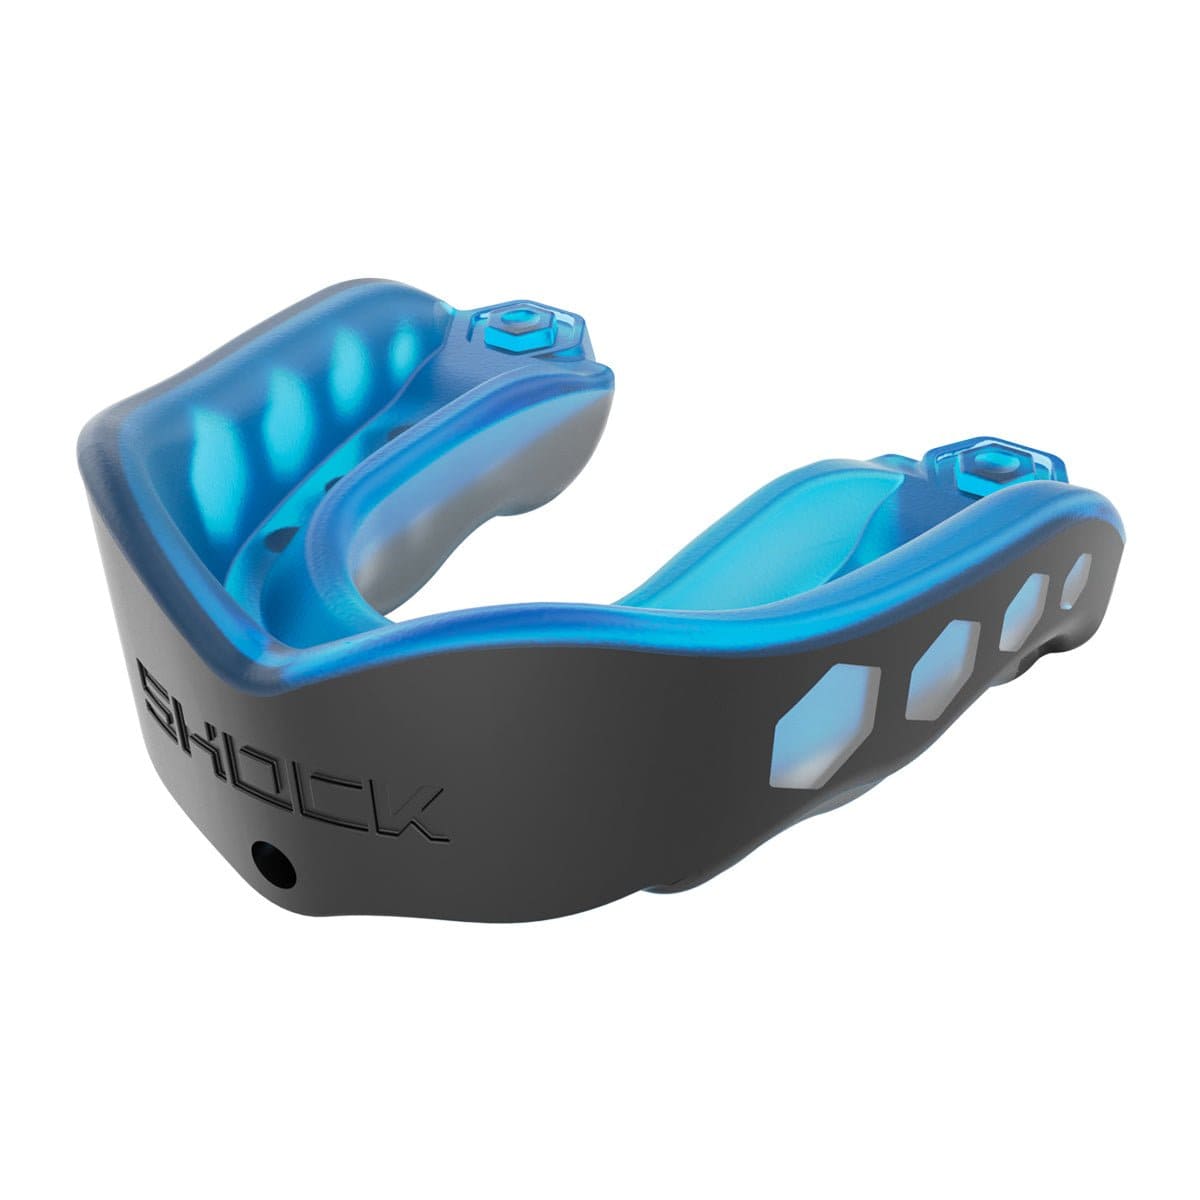 Shock Doc sporting goods Shock Doctor "Gel Max"  Youth Mouthguard karate